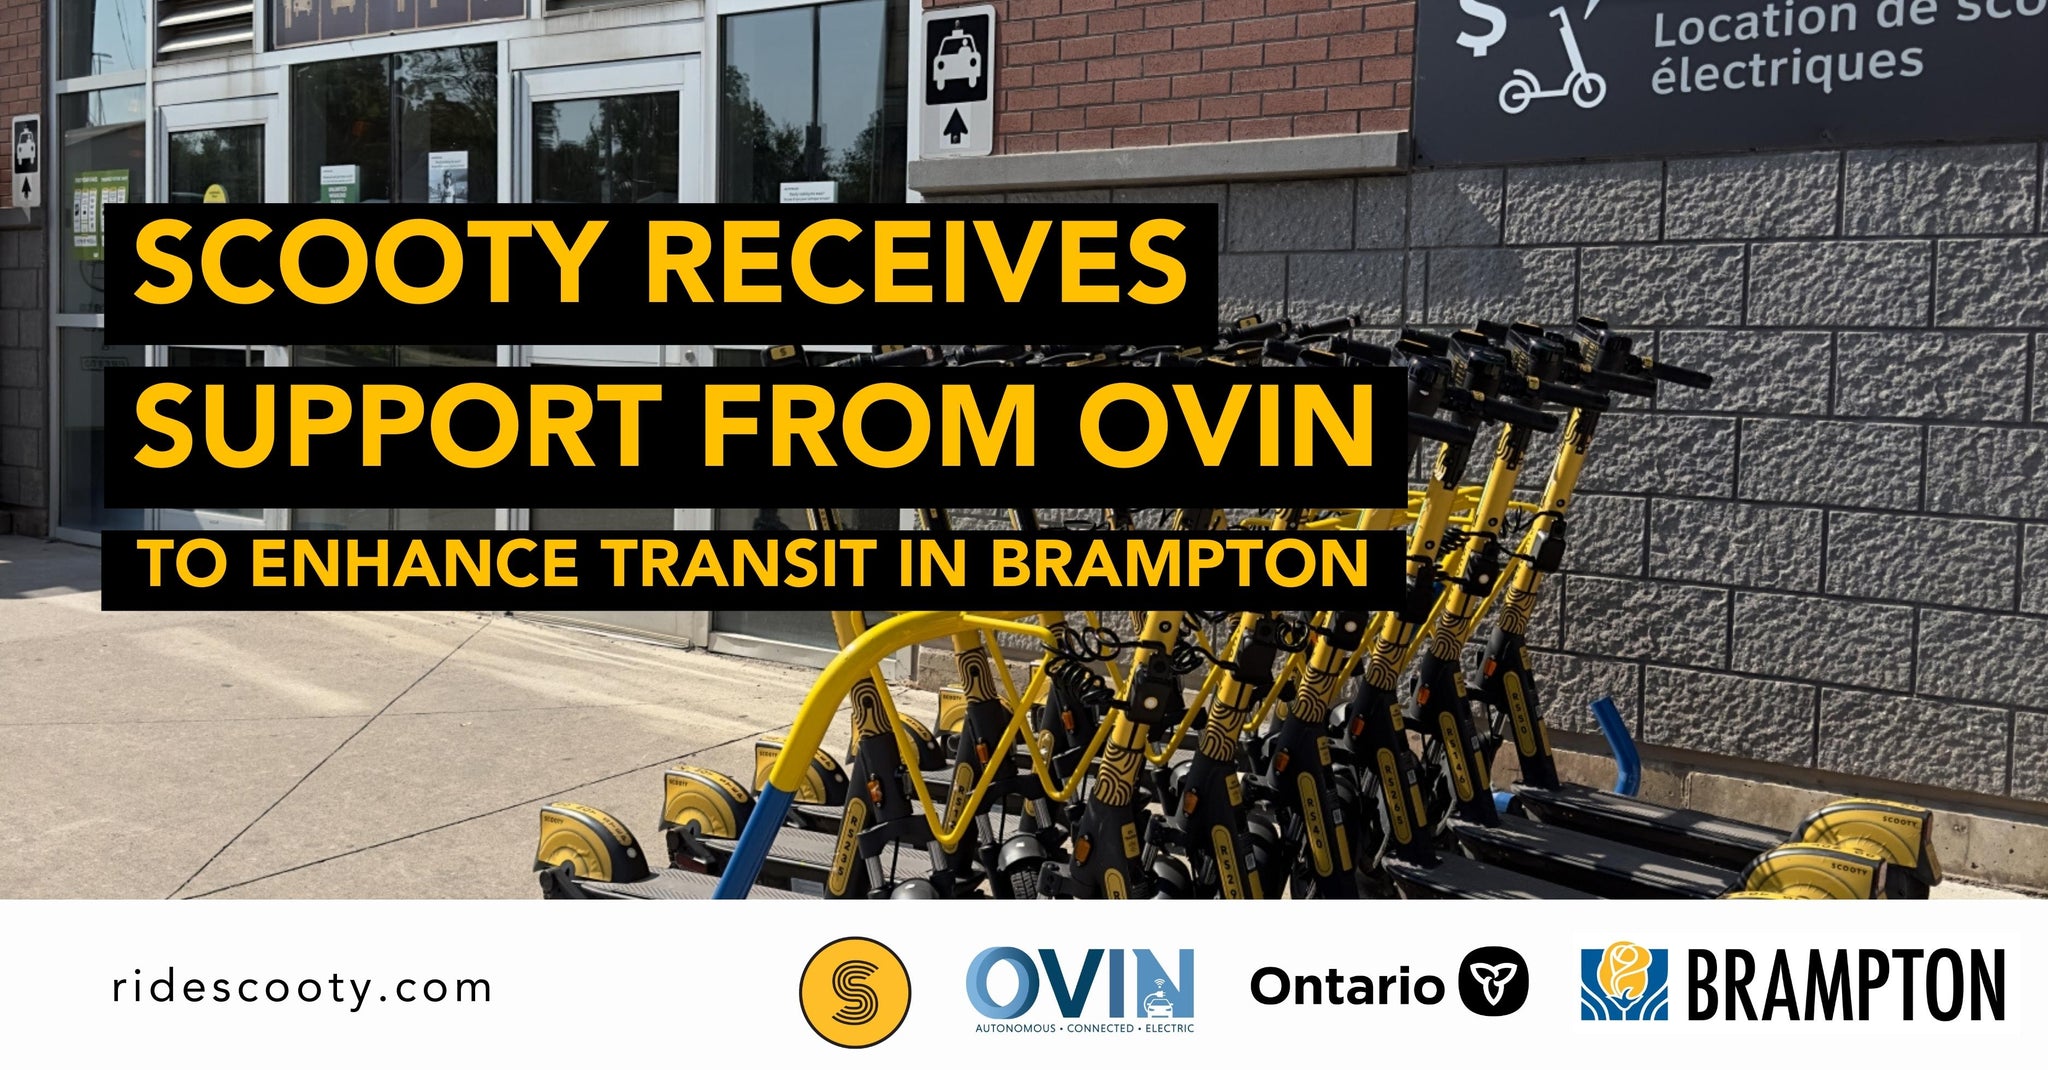 SCOOTY RECEIVES SUPPORT FROM OVIN TO ENHANCE TRANSIT IN BRAMPTON